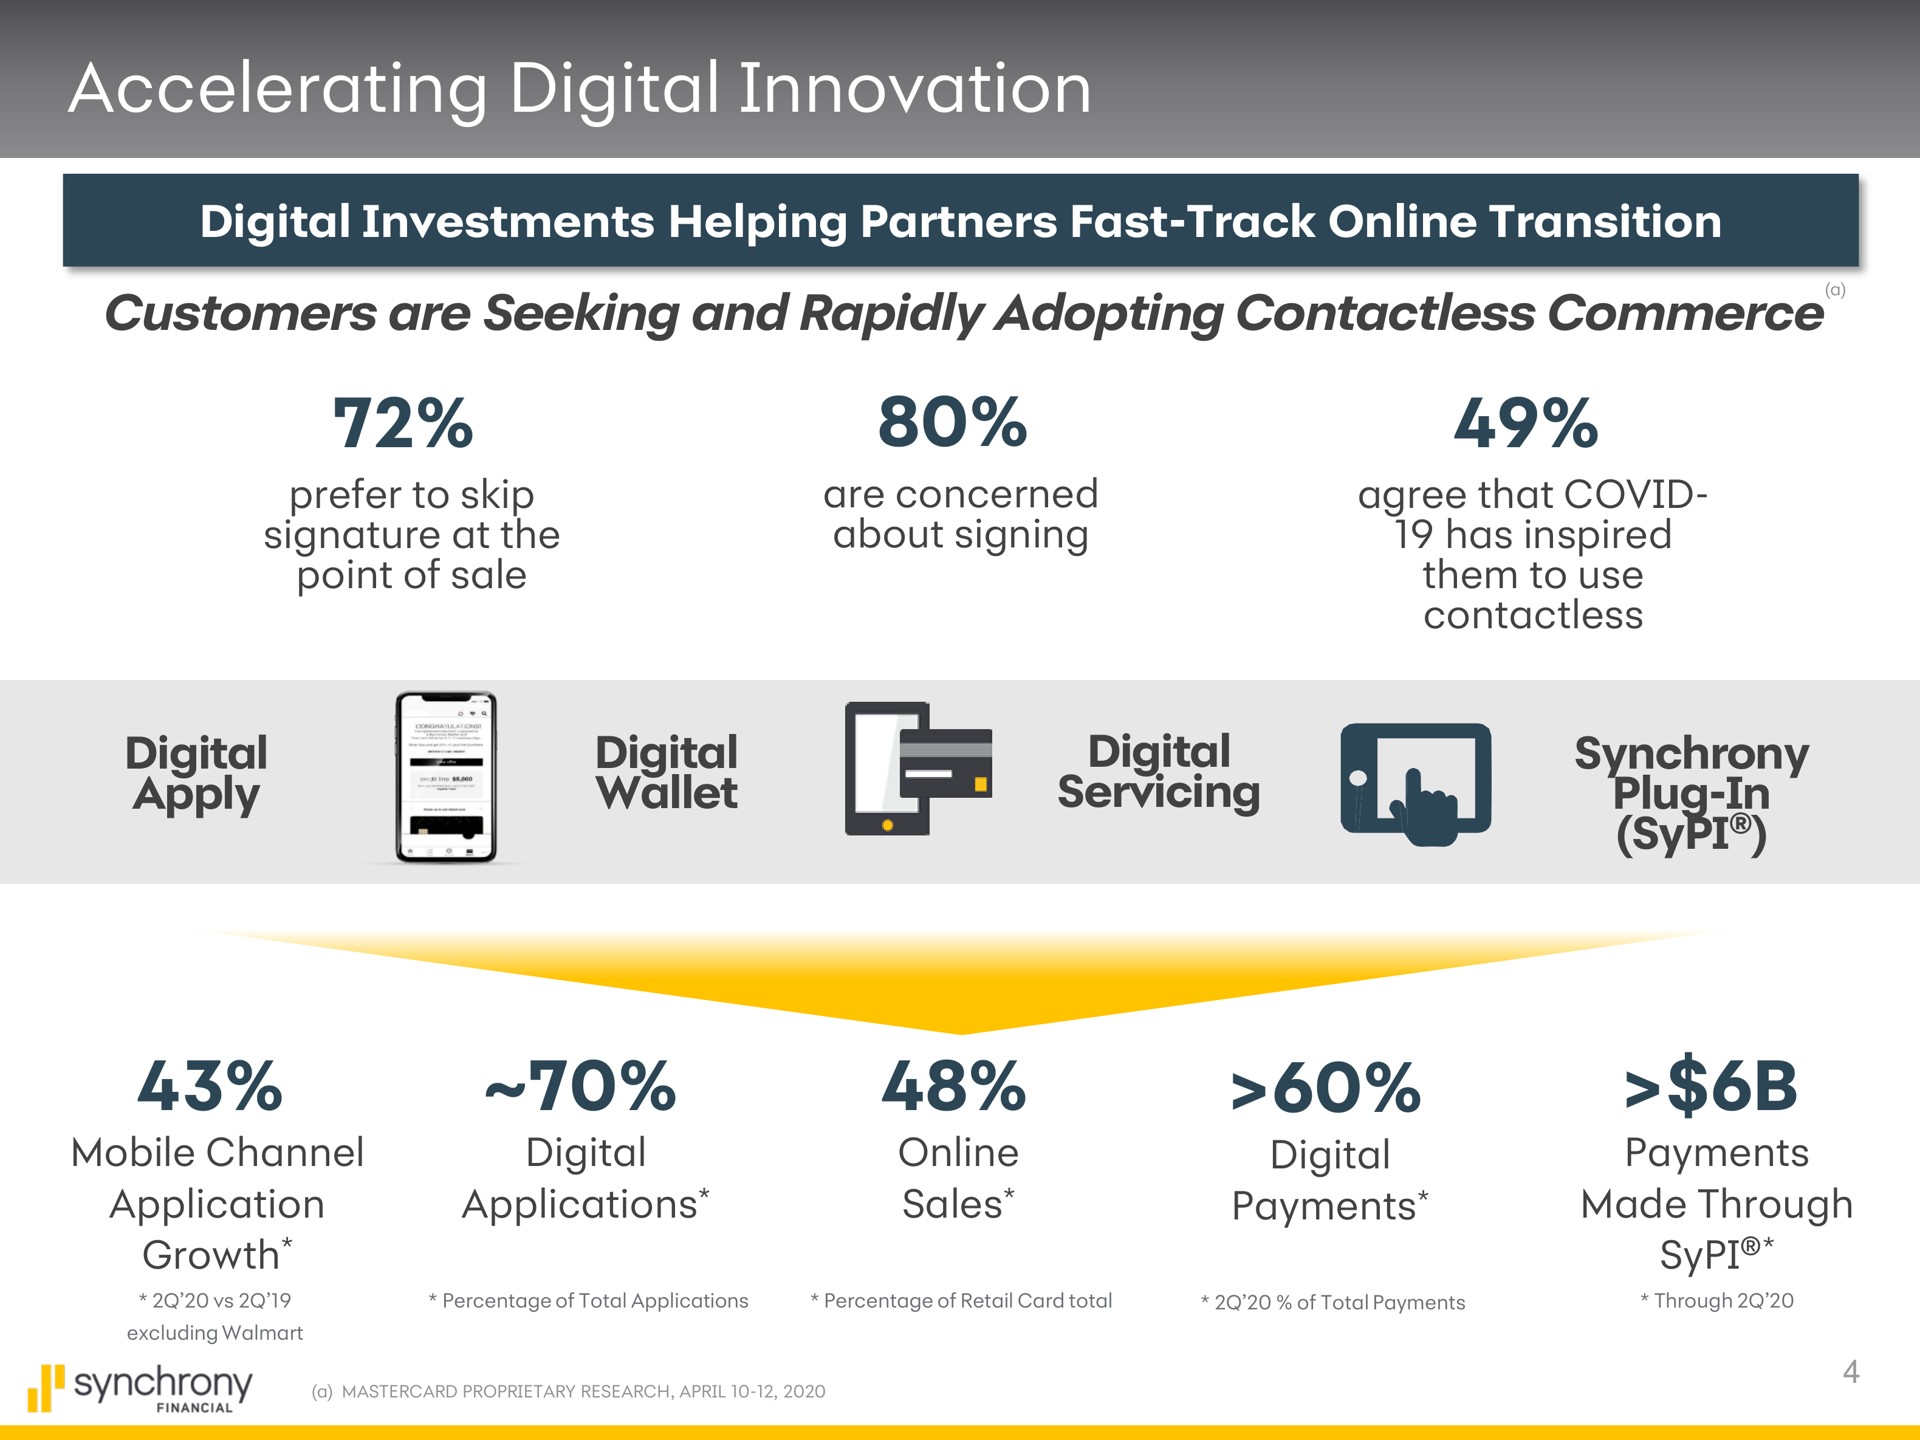 accelerating digital innovation digital investments helping partners fast track transition customers are seeking and rapidly adopting commerce a digital apply digital wallet digital servicing synchrony plug in | Synchrony Financial